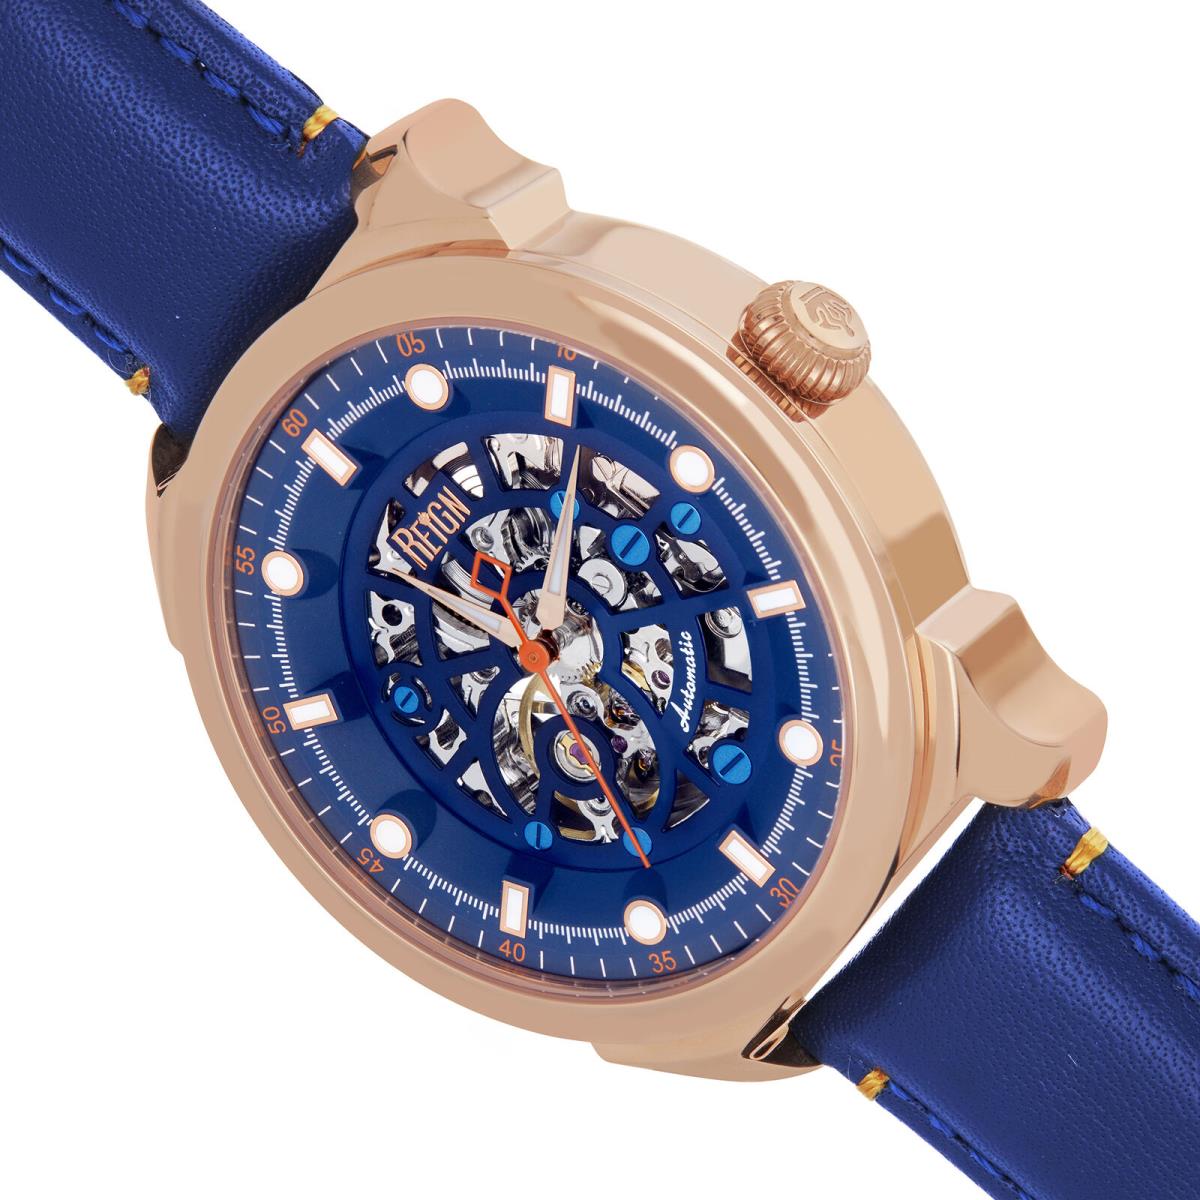 Reign Weston Automatic Skeletonized Leather-band Watch - Rose Gold/blue